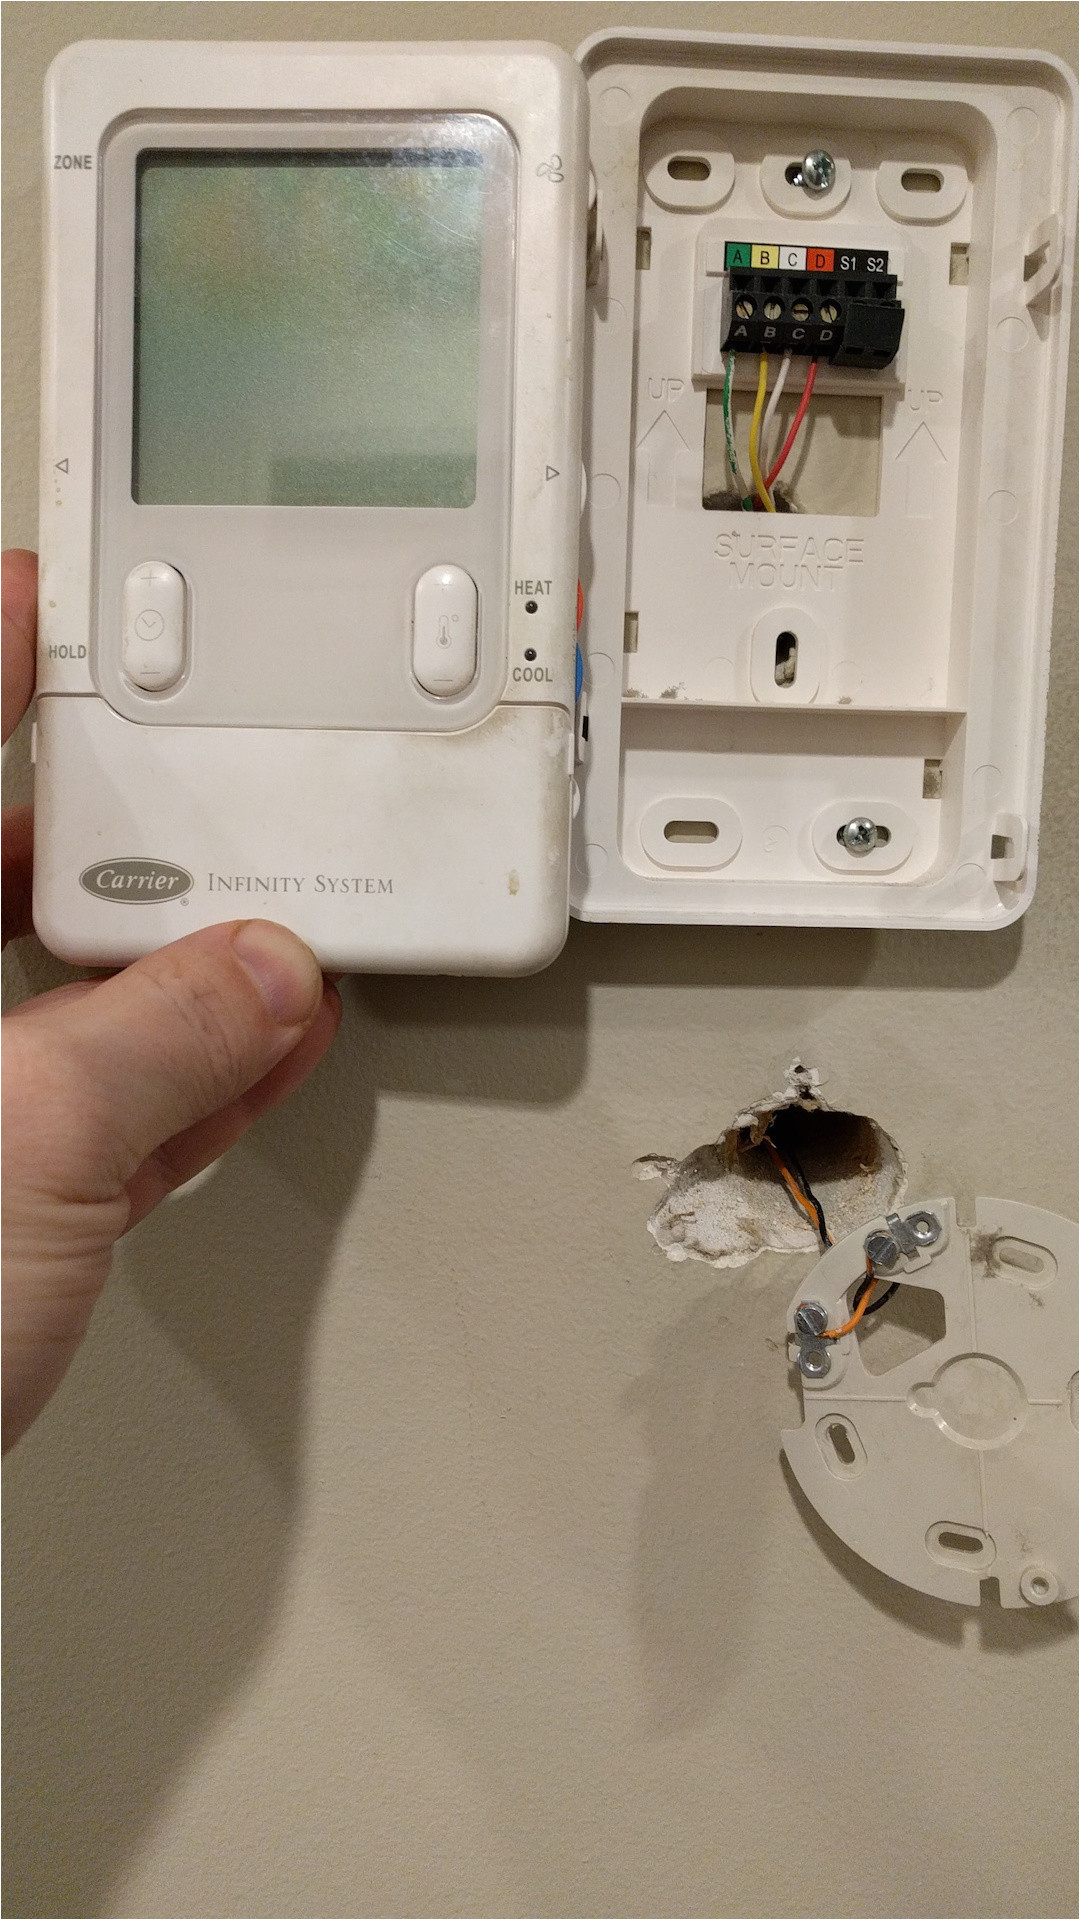 hvac help wiring a nest thermostat in an unusual situation home nest wiring diagram for carrier infinity